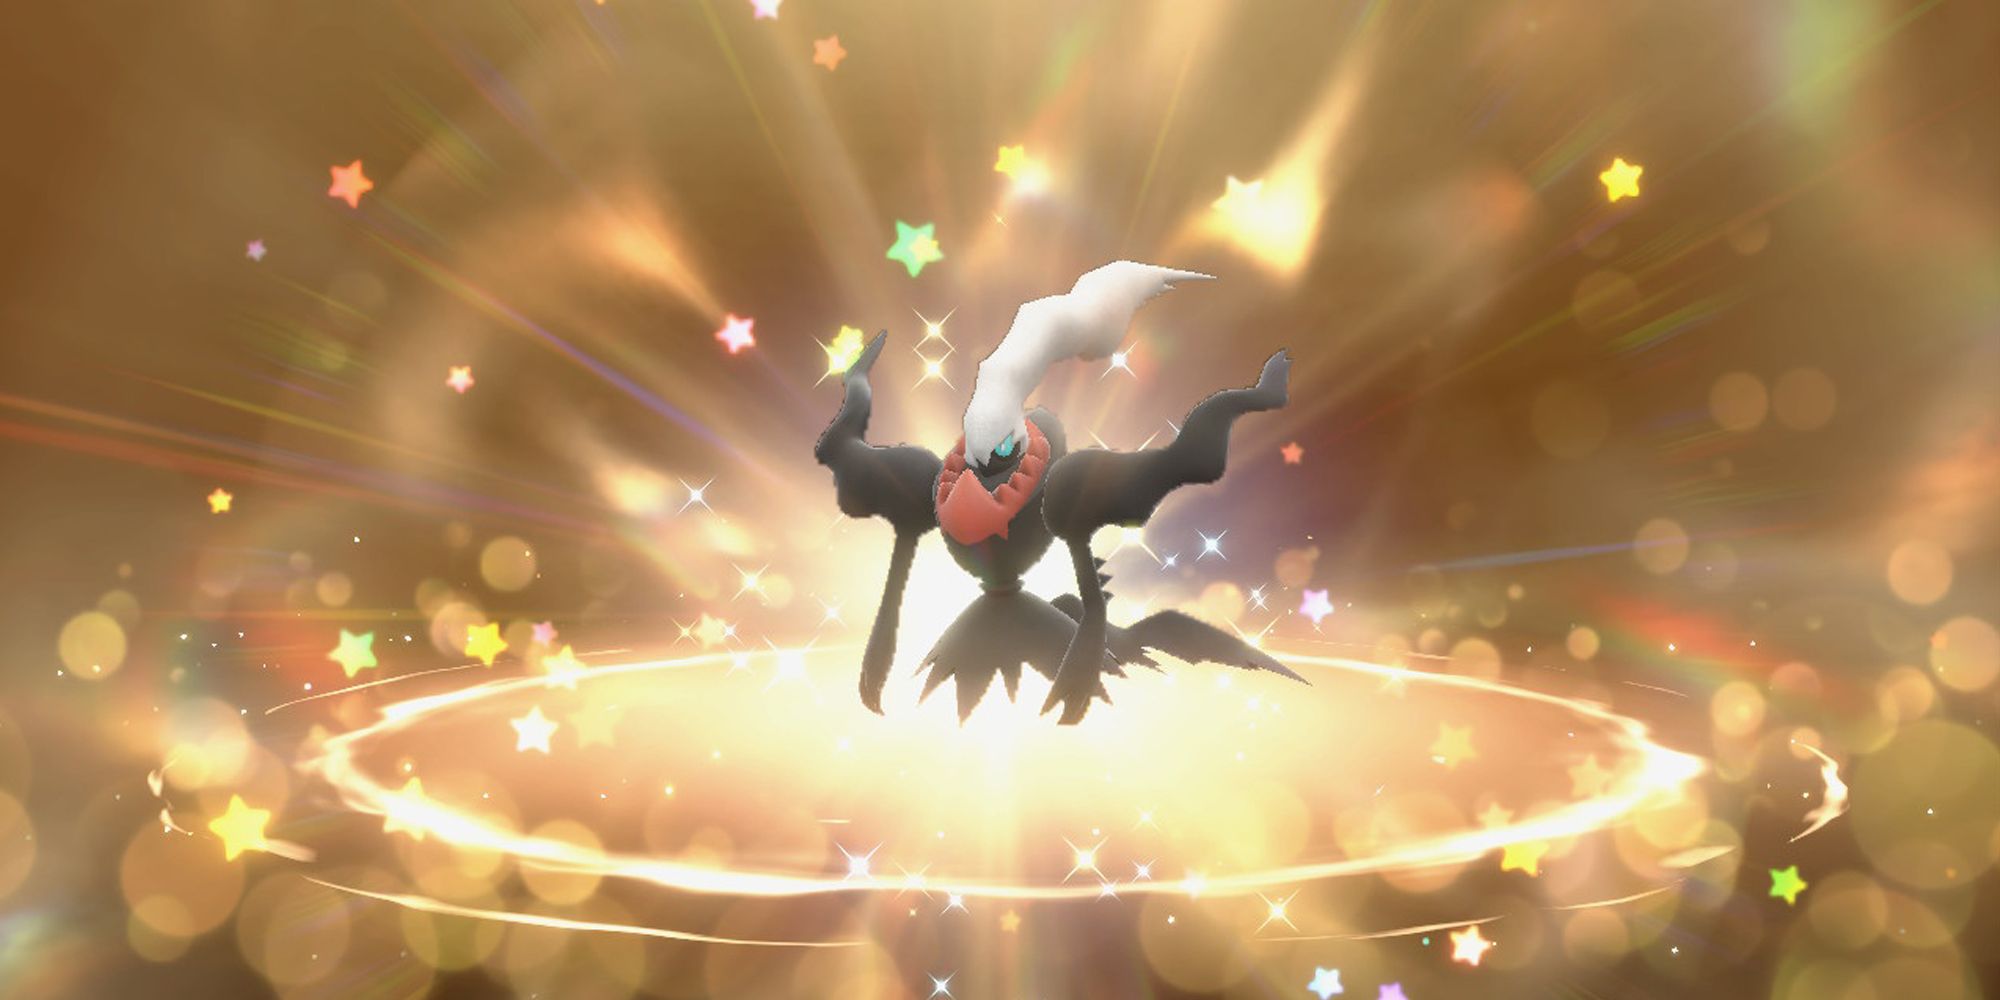 Darkrai surrounded by stars from the Mystery Gift event in Pokemon Scarlet & Violet.